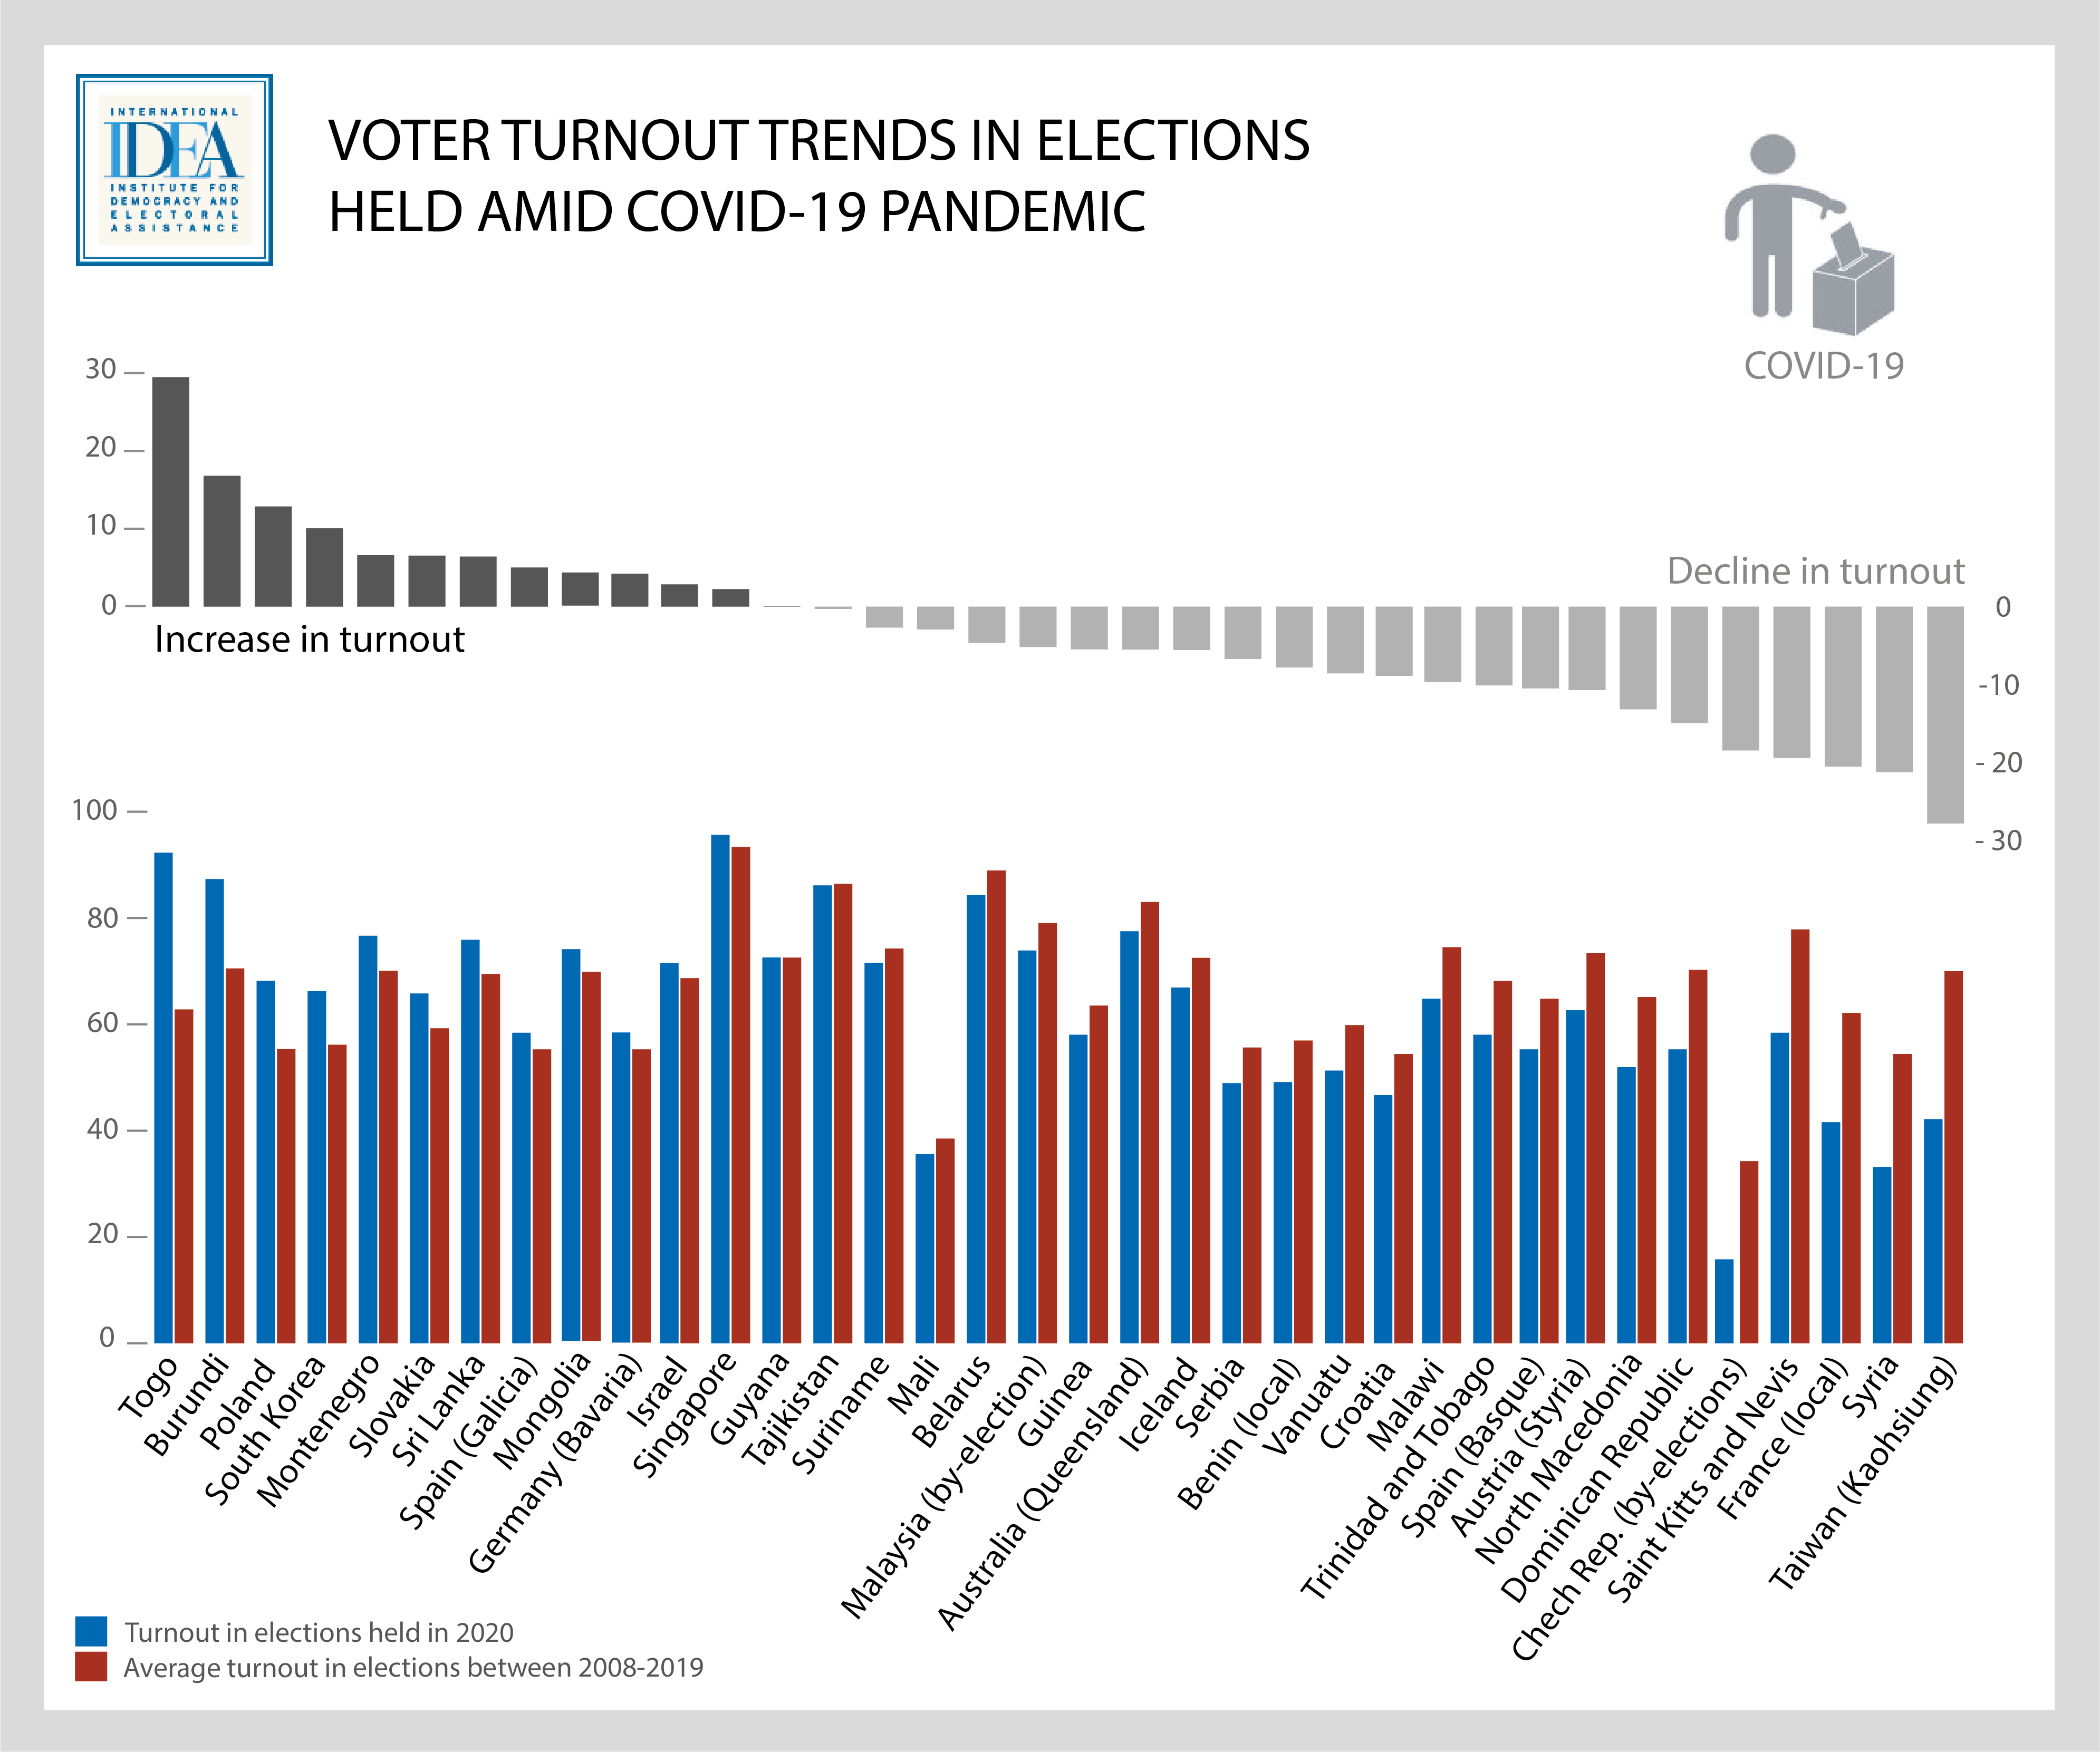 Figure 1:  While most of the countries and territories that held elections amid the COVID-19 have seen a decline in turnout, there has been a number of countries and territories where the turnout increased. Image credit: International IDEA.